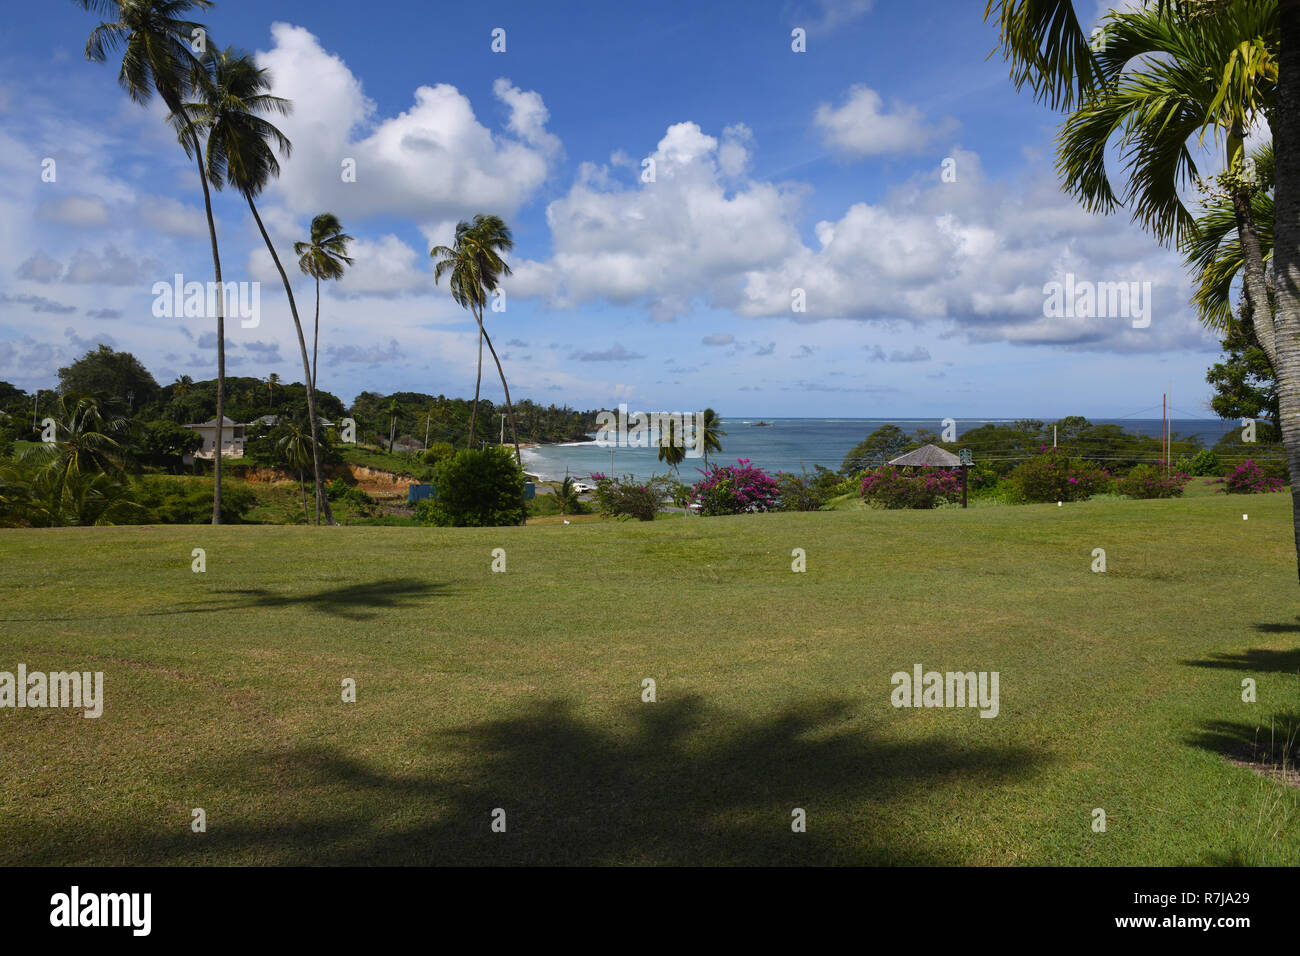 Poster like picturesque composition of well established holiday beach resort of northern Tobago within beautiful hilly surroundings and facilities. Stock Photo